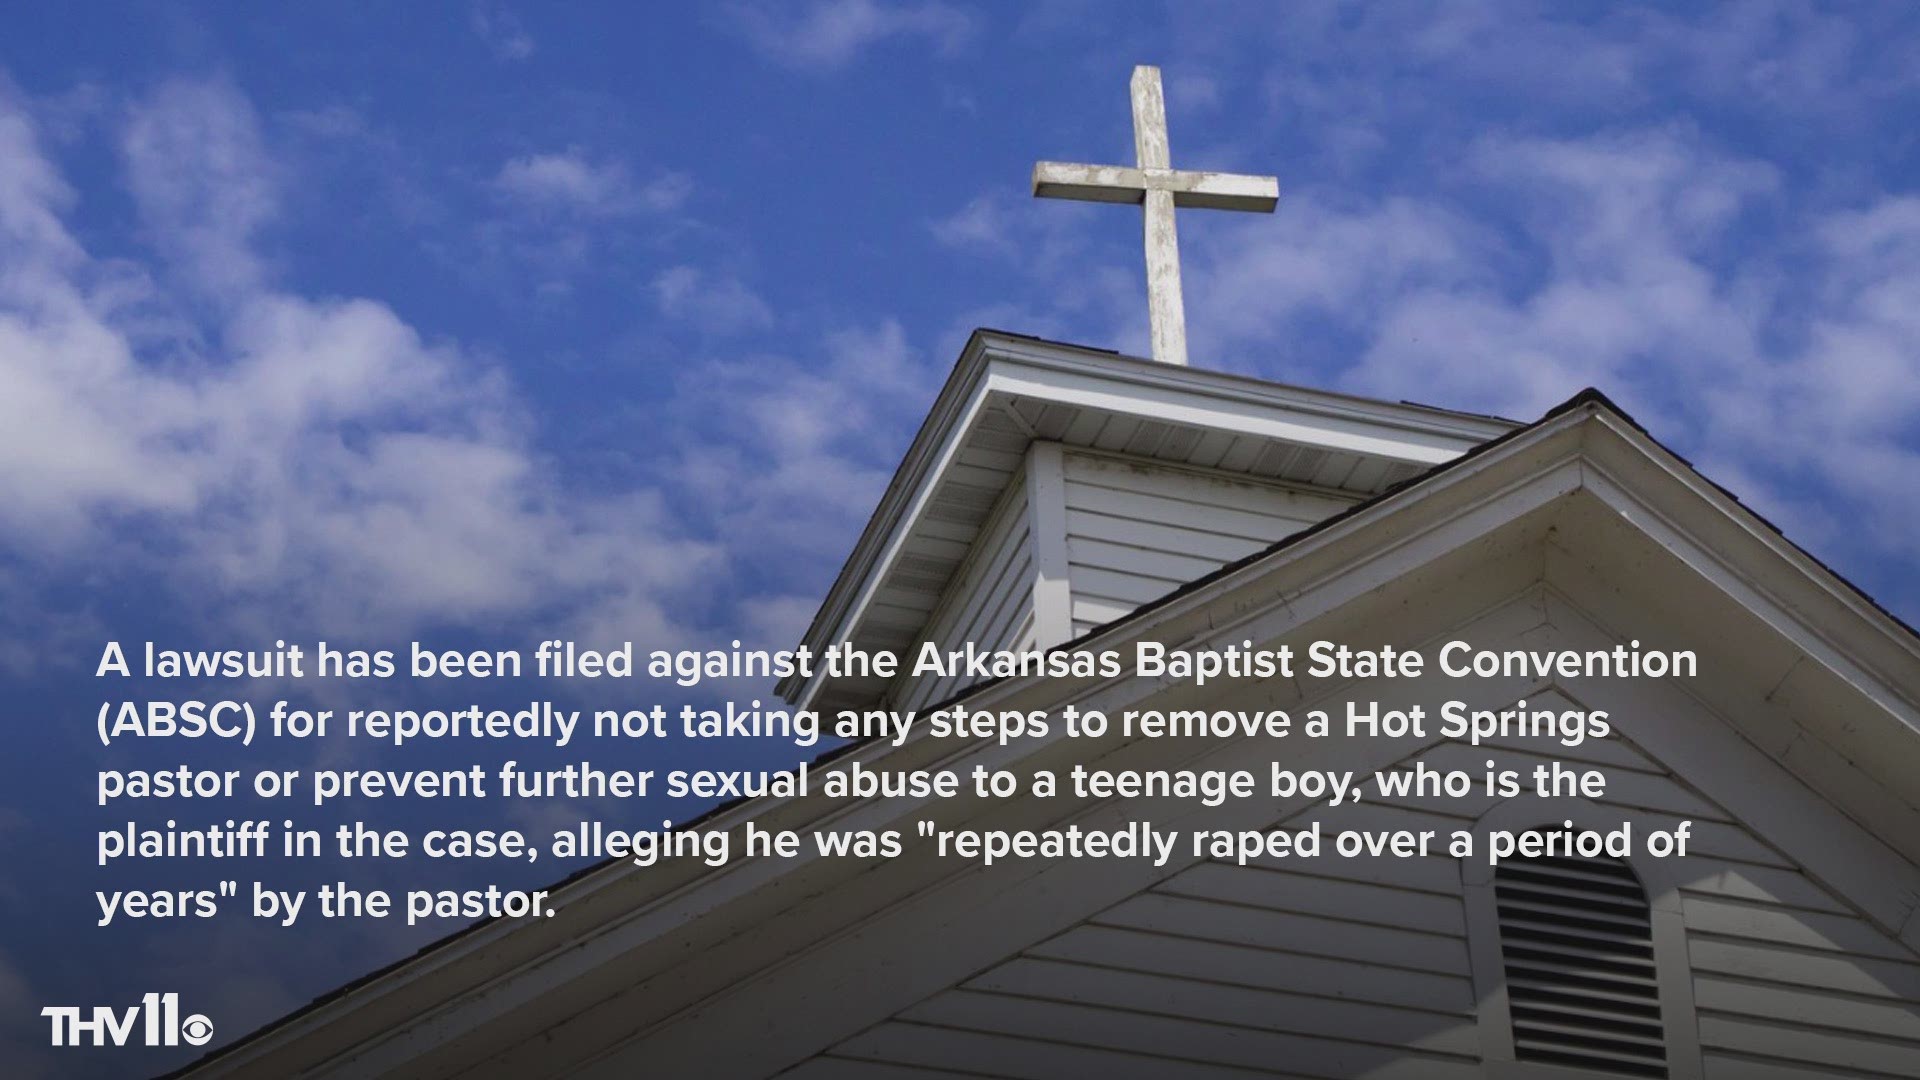 A teen boy has filed a lawsuit against a church organization for not doing more after reportedly being made aware of the sexual abuse.